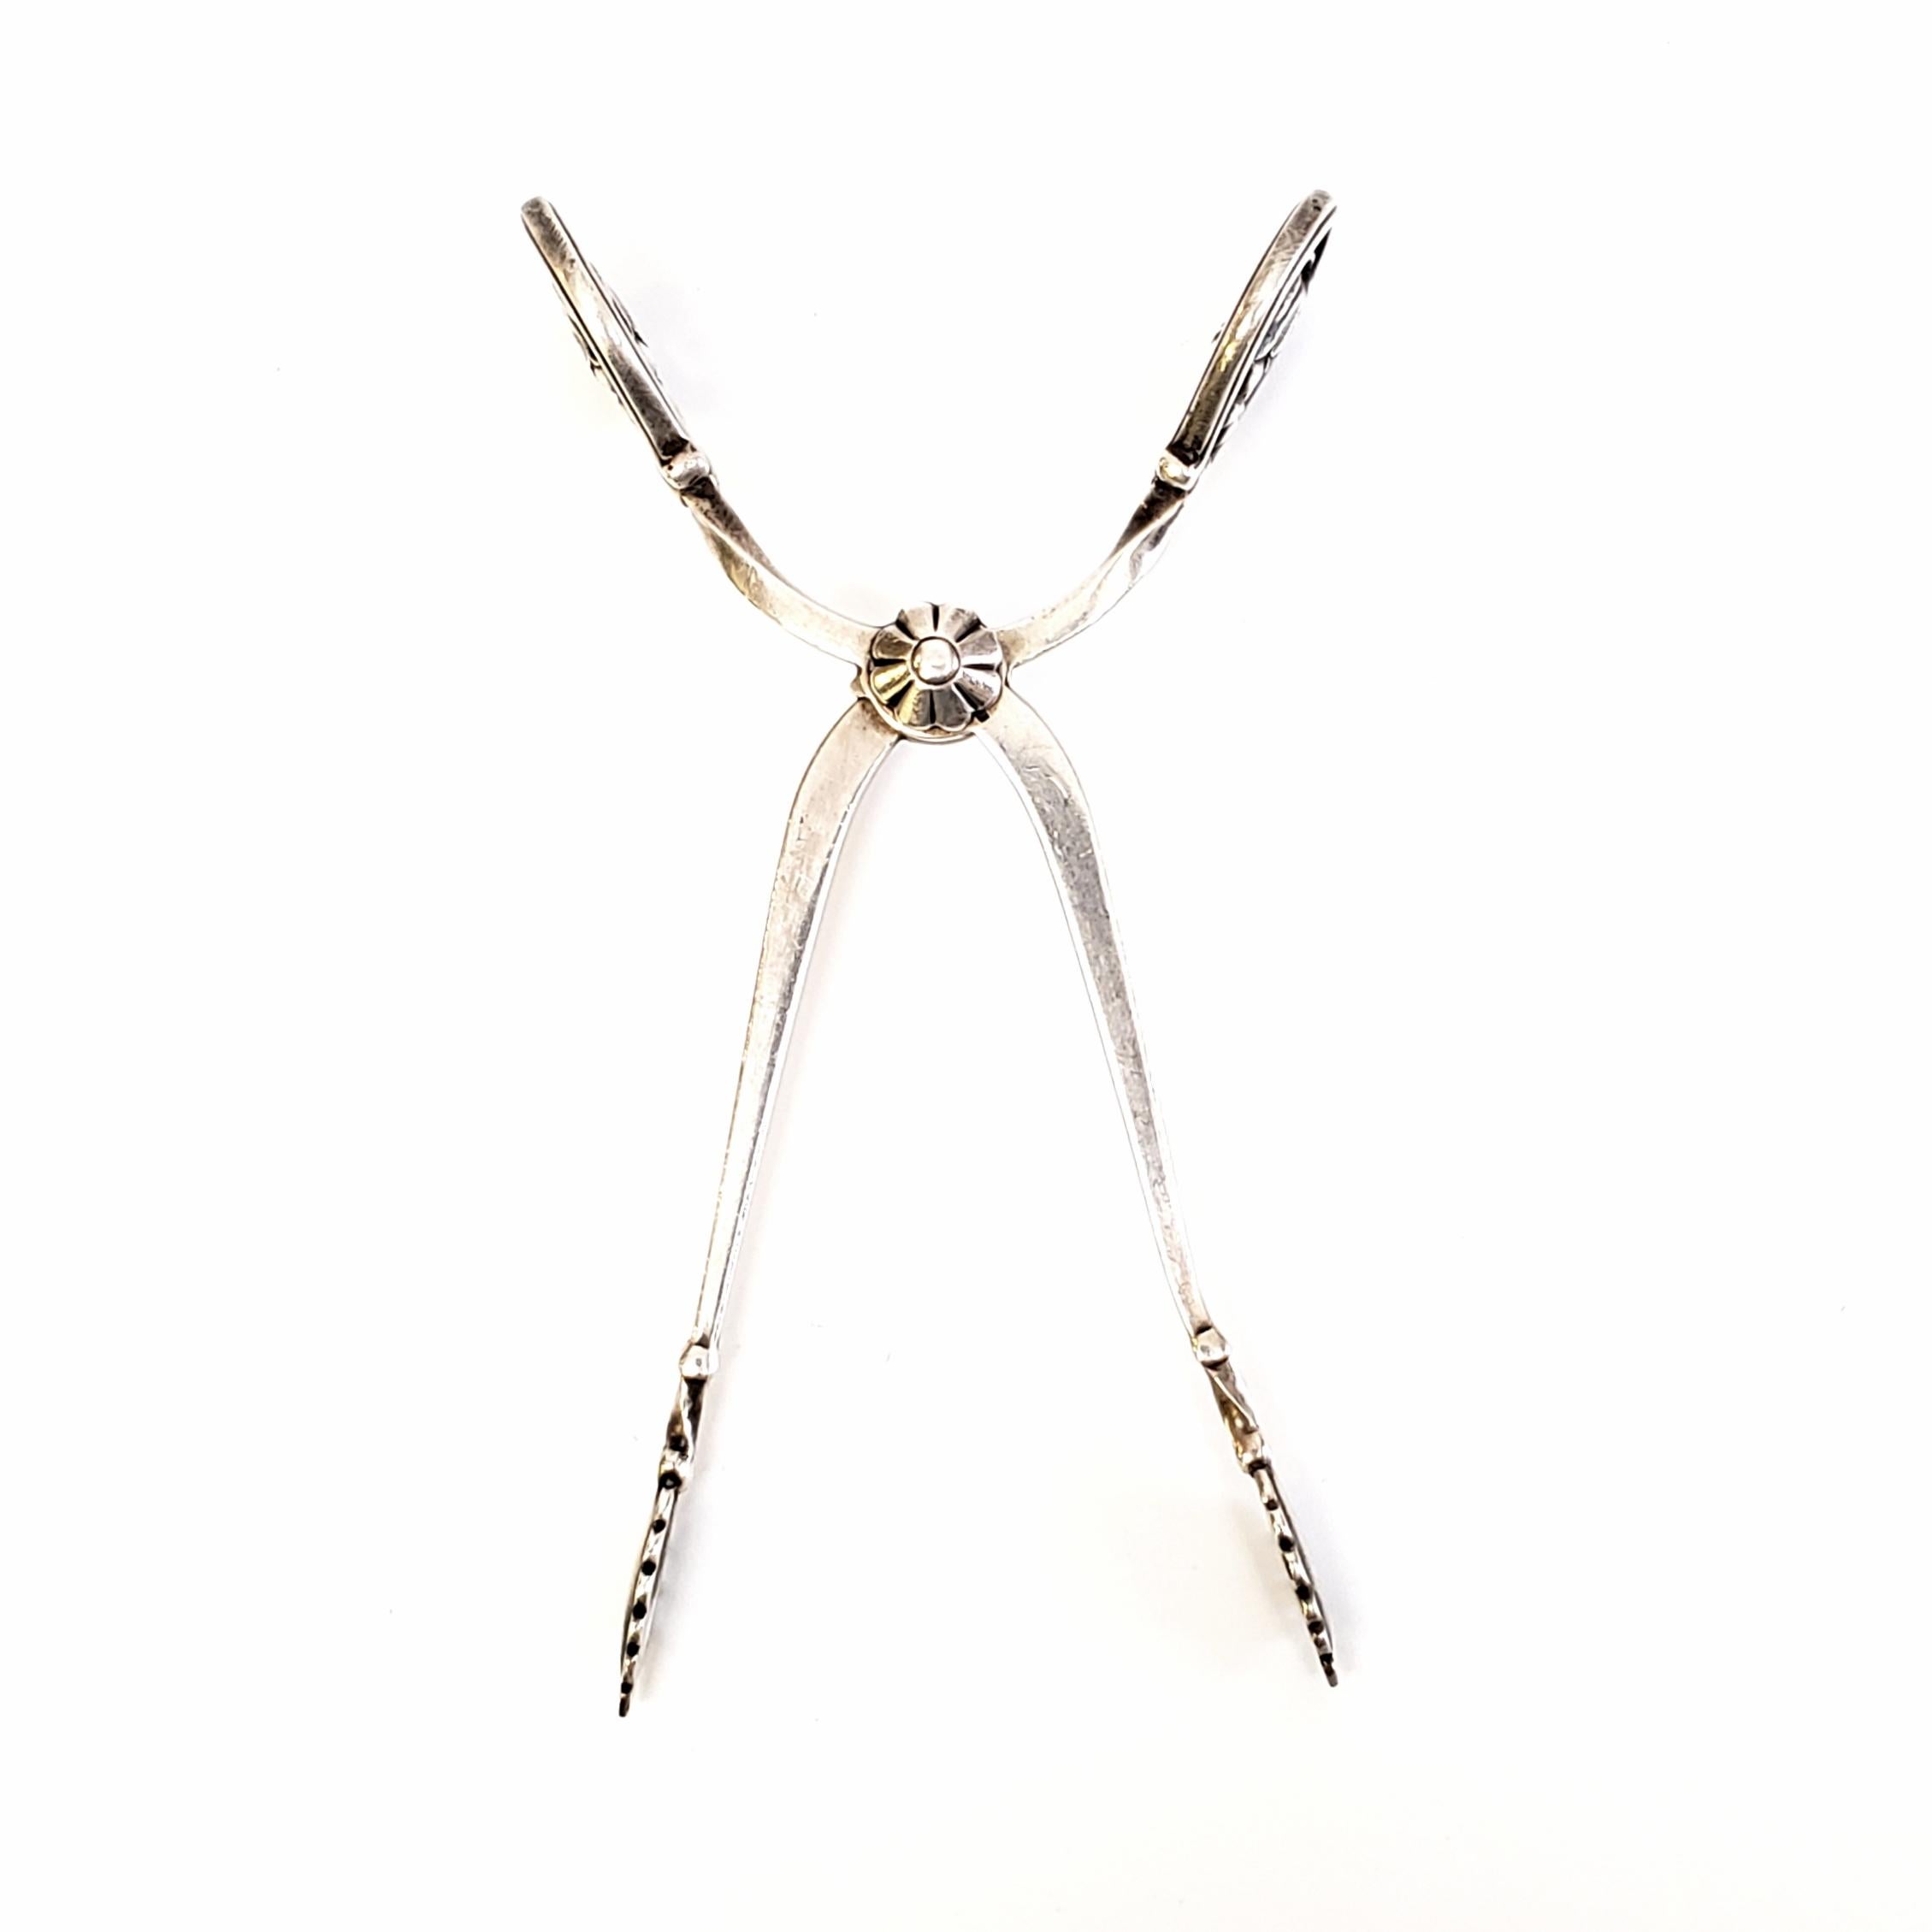 Antique Georg Jensen Denmark sterling silver sugar tongs in the Blossom pattern.

The Blossom pattern was created by Georg Jensen himself for a full cutlery range in 1919. The pattern features a bud on the verge of blossoming, the epitome of